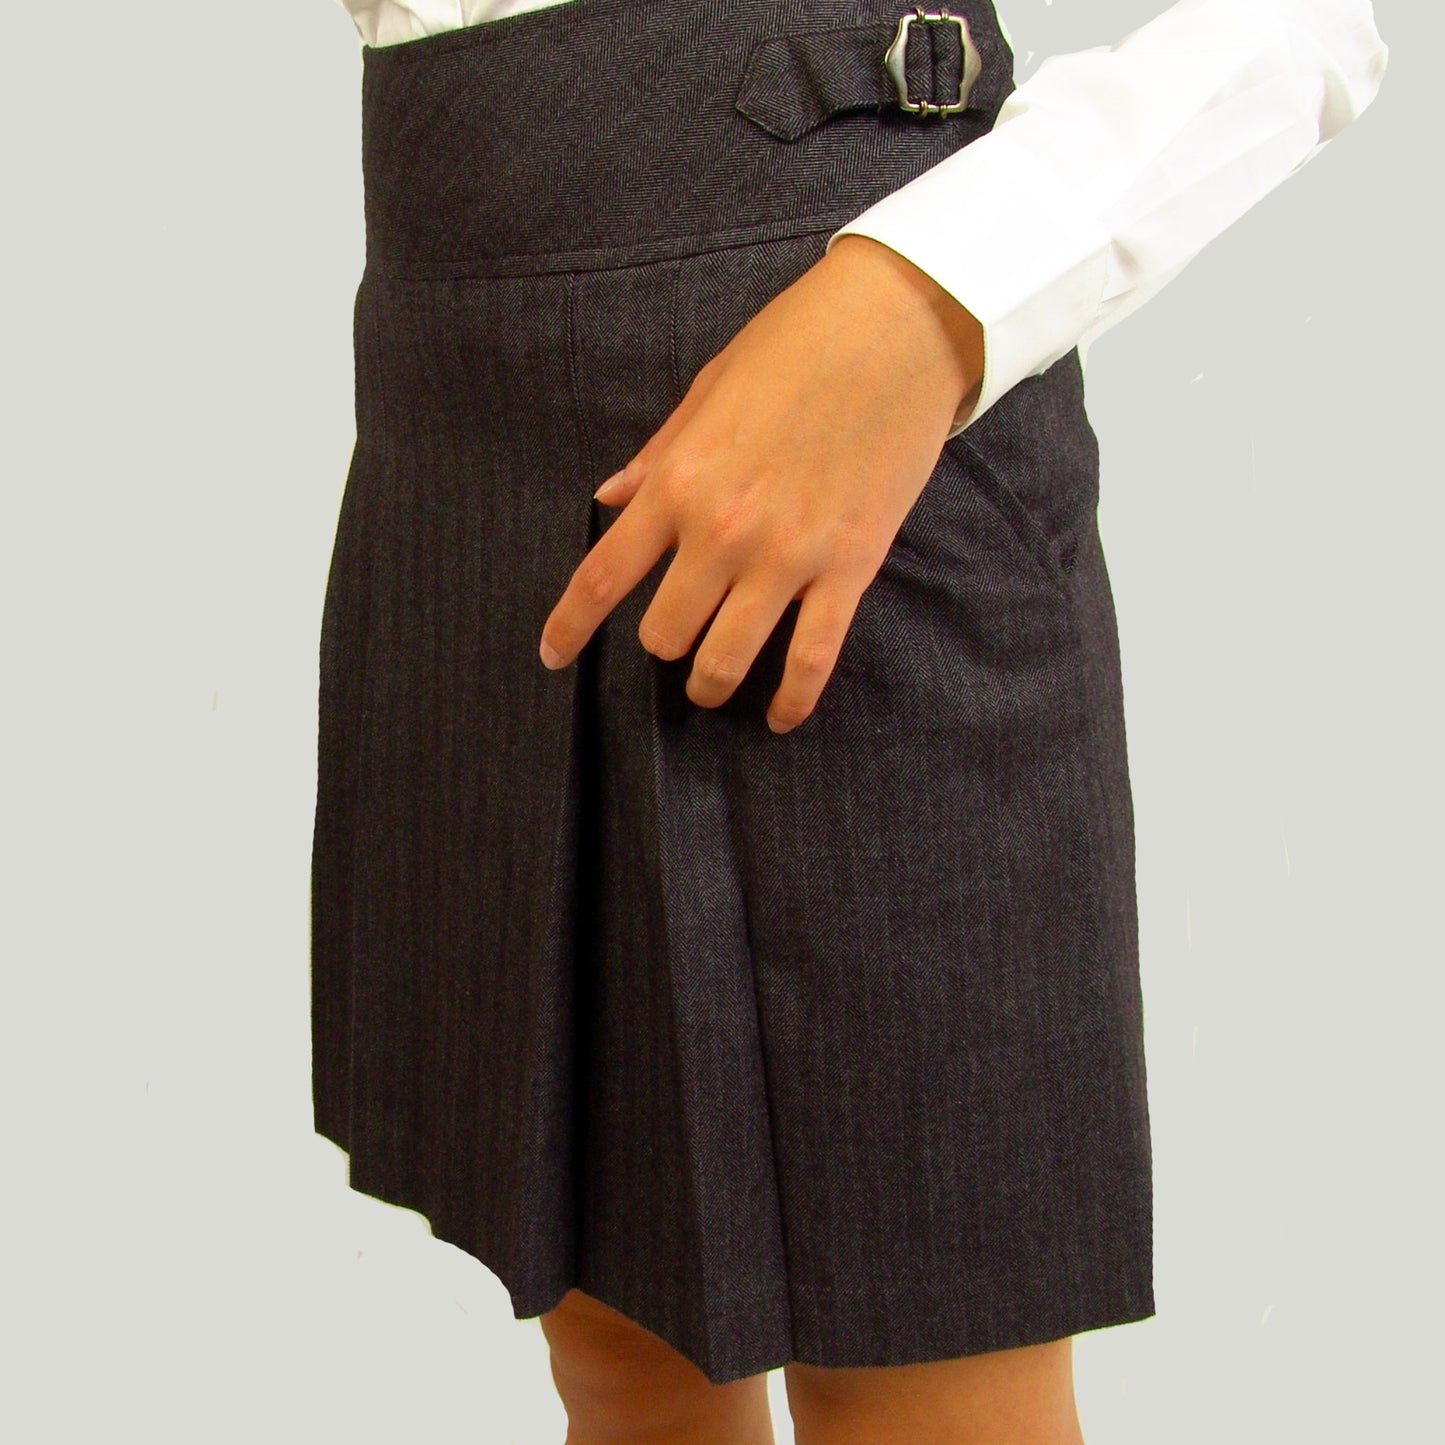 Women's Skirt with pleats and pockets